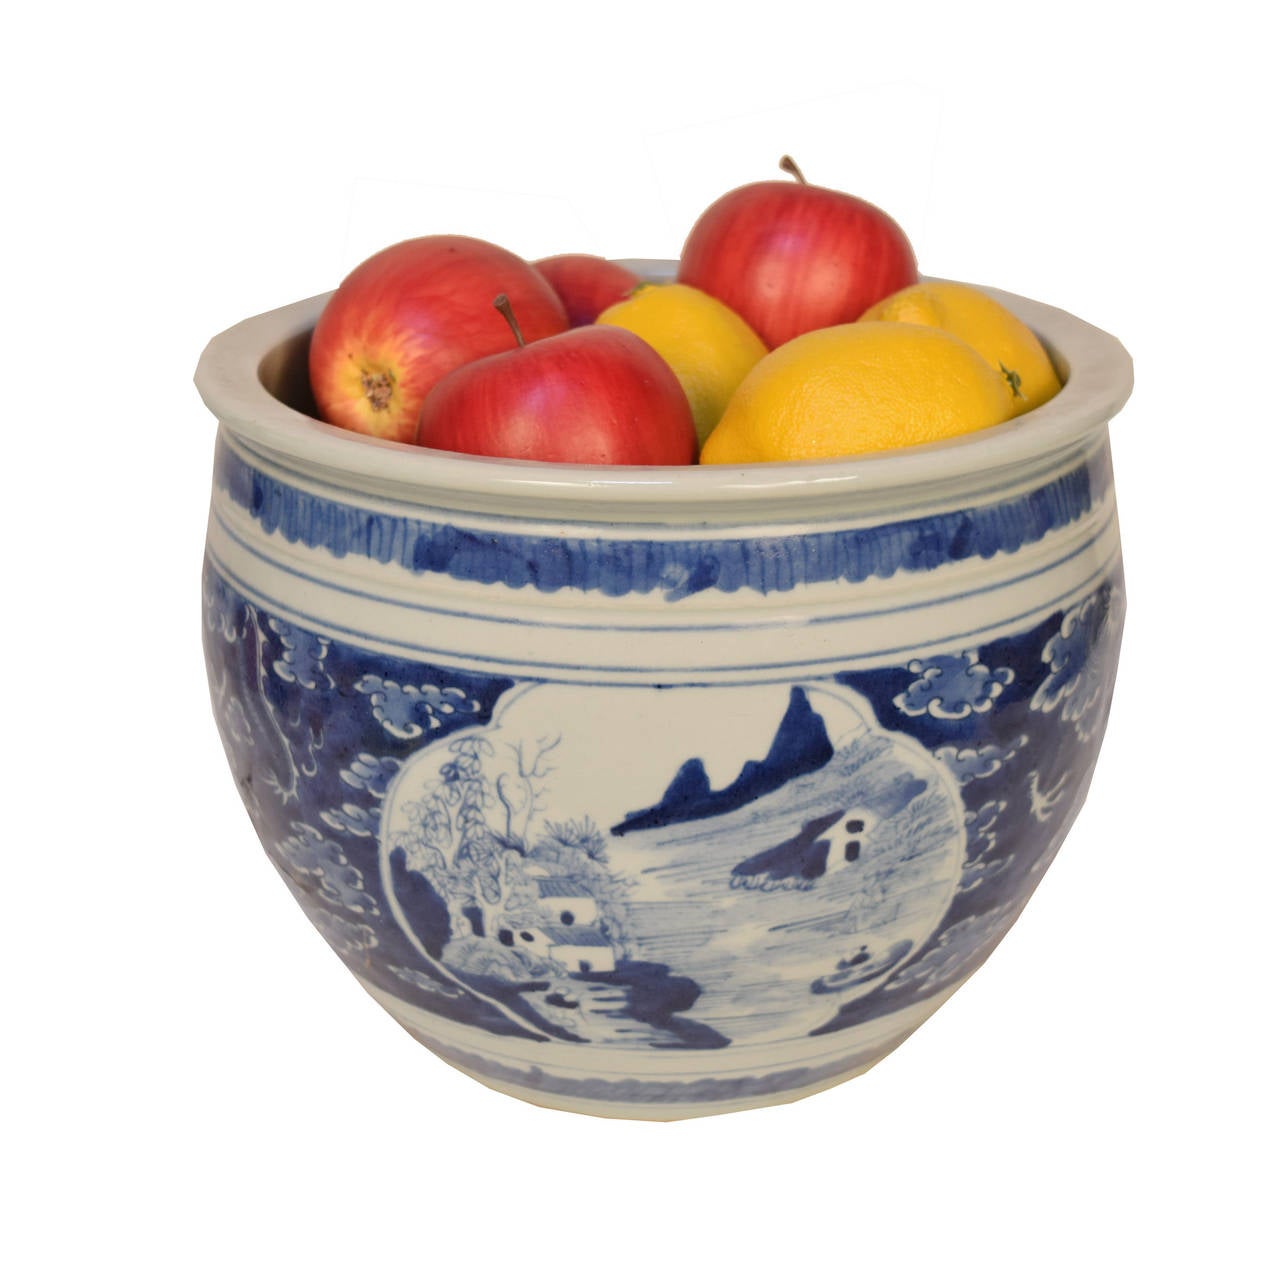 20th Century Chinese Blue and White Bowl with Landscape Scene and Dragons Amongst Clouds